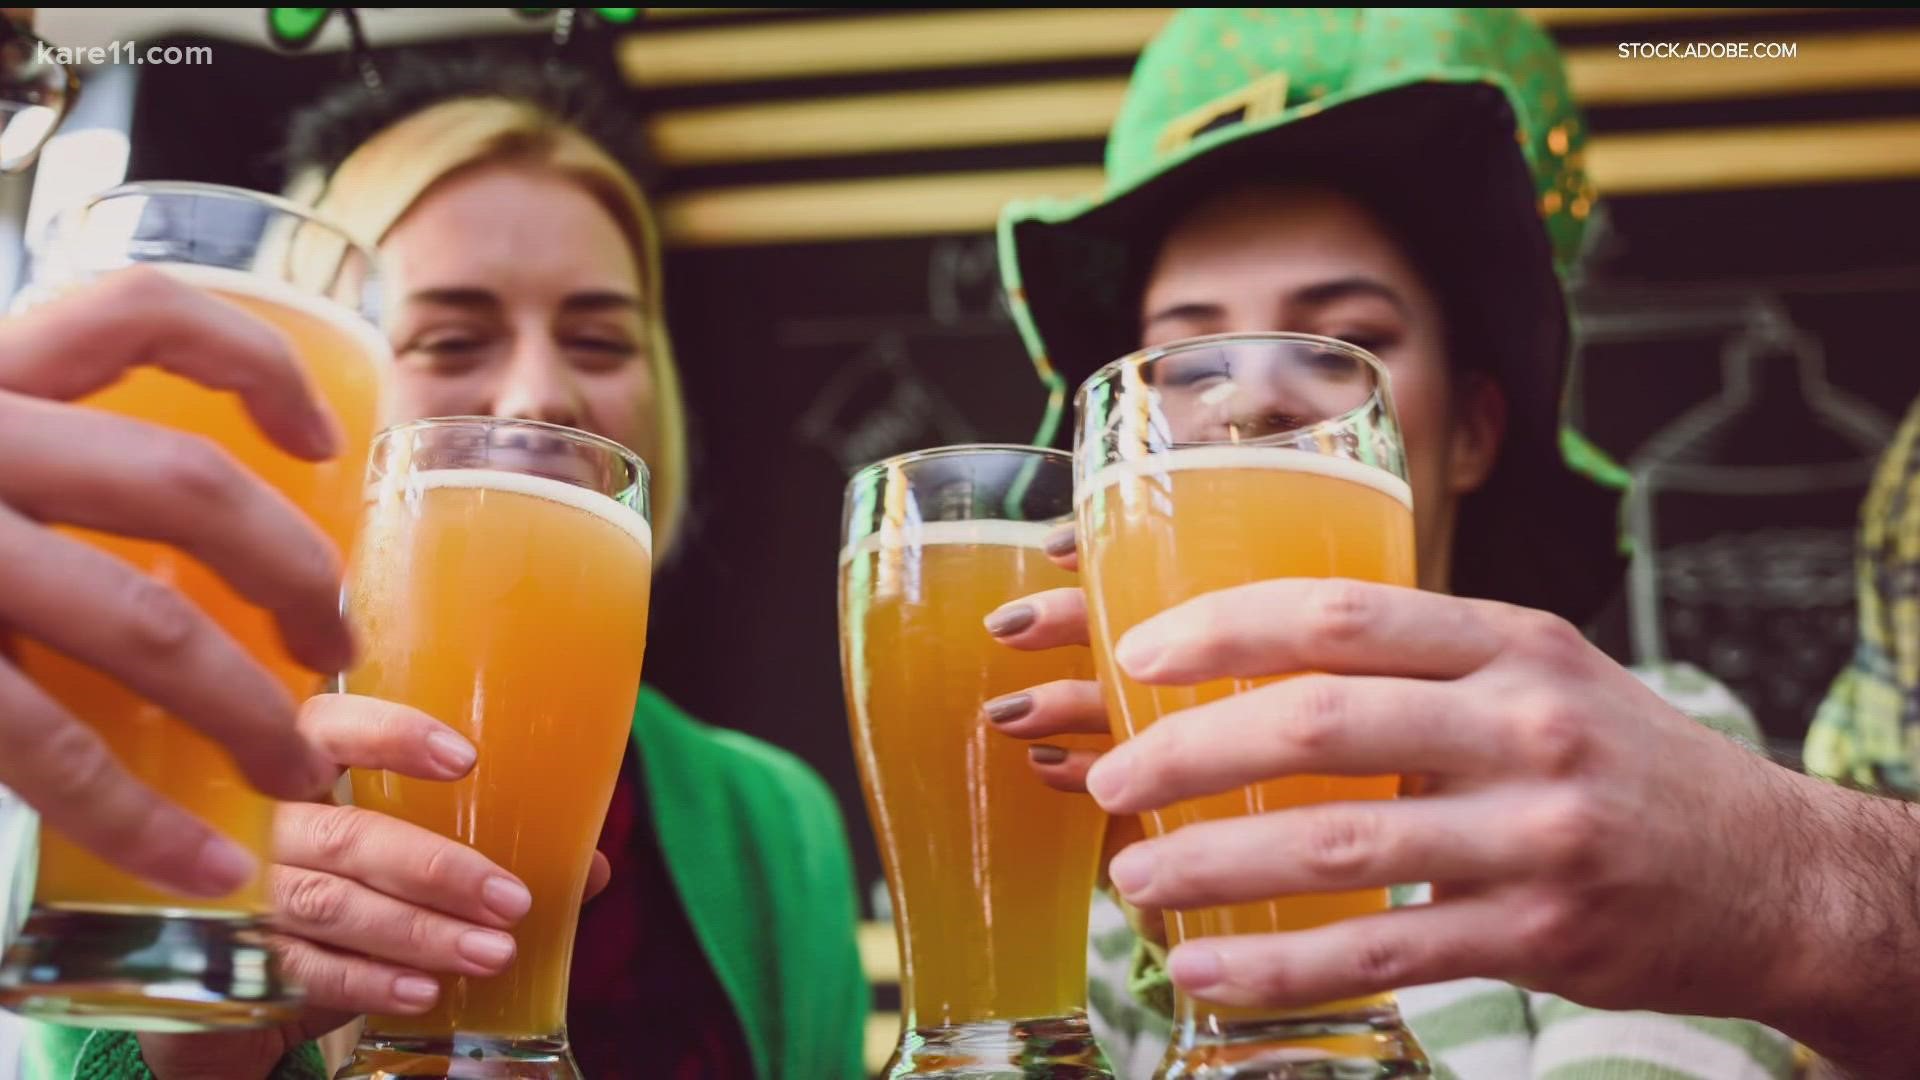 Here's how to avoid damaging your heart on St. Patrick's Day.